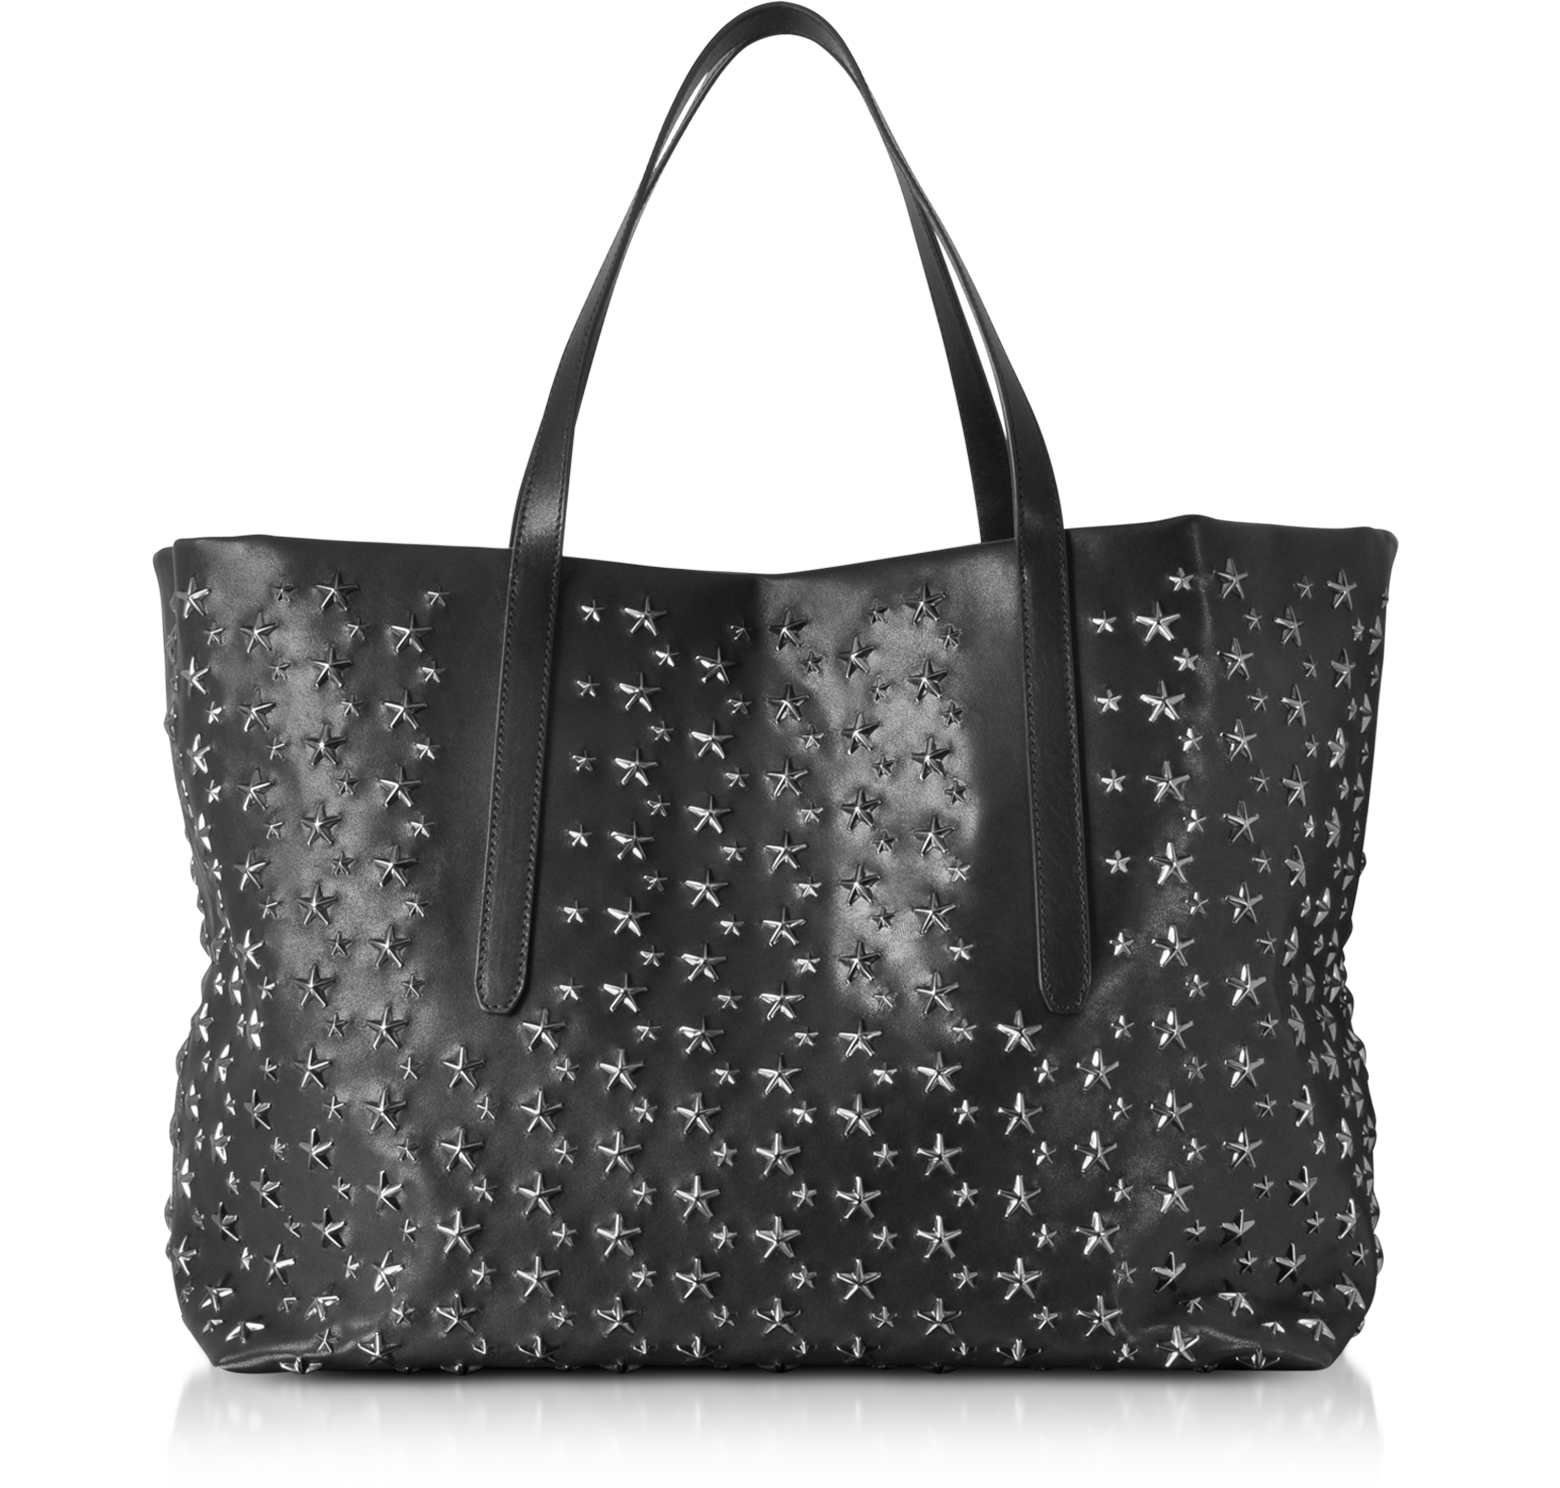 Jimmy Choo Black Stars Studded Leather Pimlico Large Tote Bag at FORZIERI